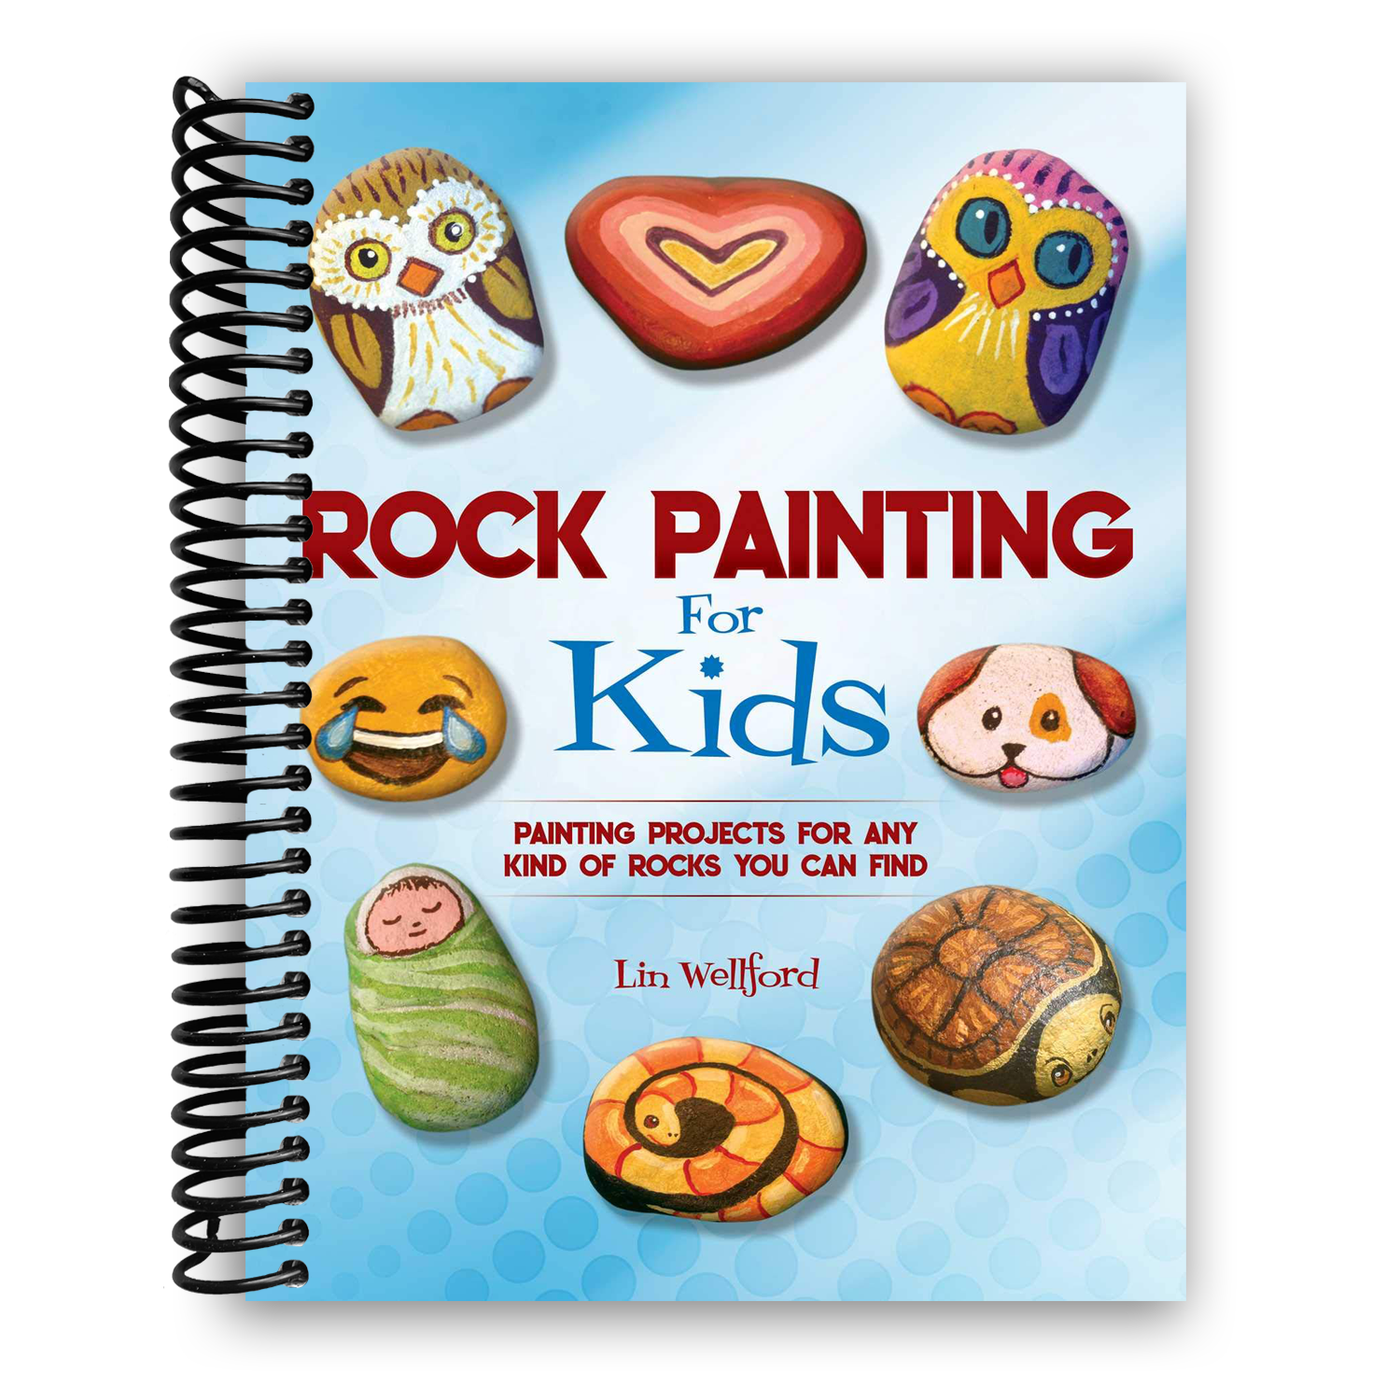 Rock Painting for Kids: Painting Projects for Rocks of Any Kind You Can Find (Spiral Bound)